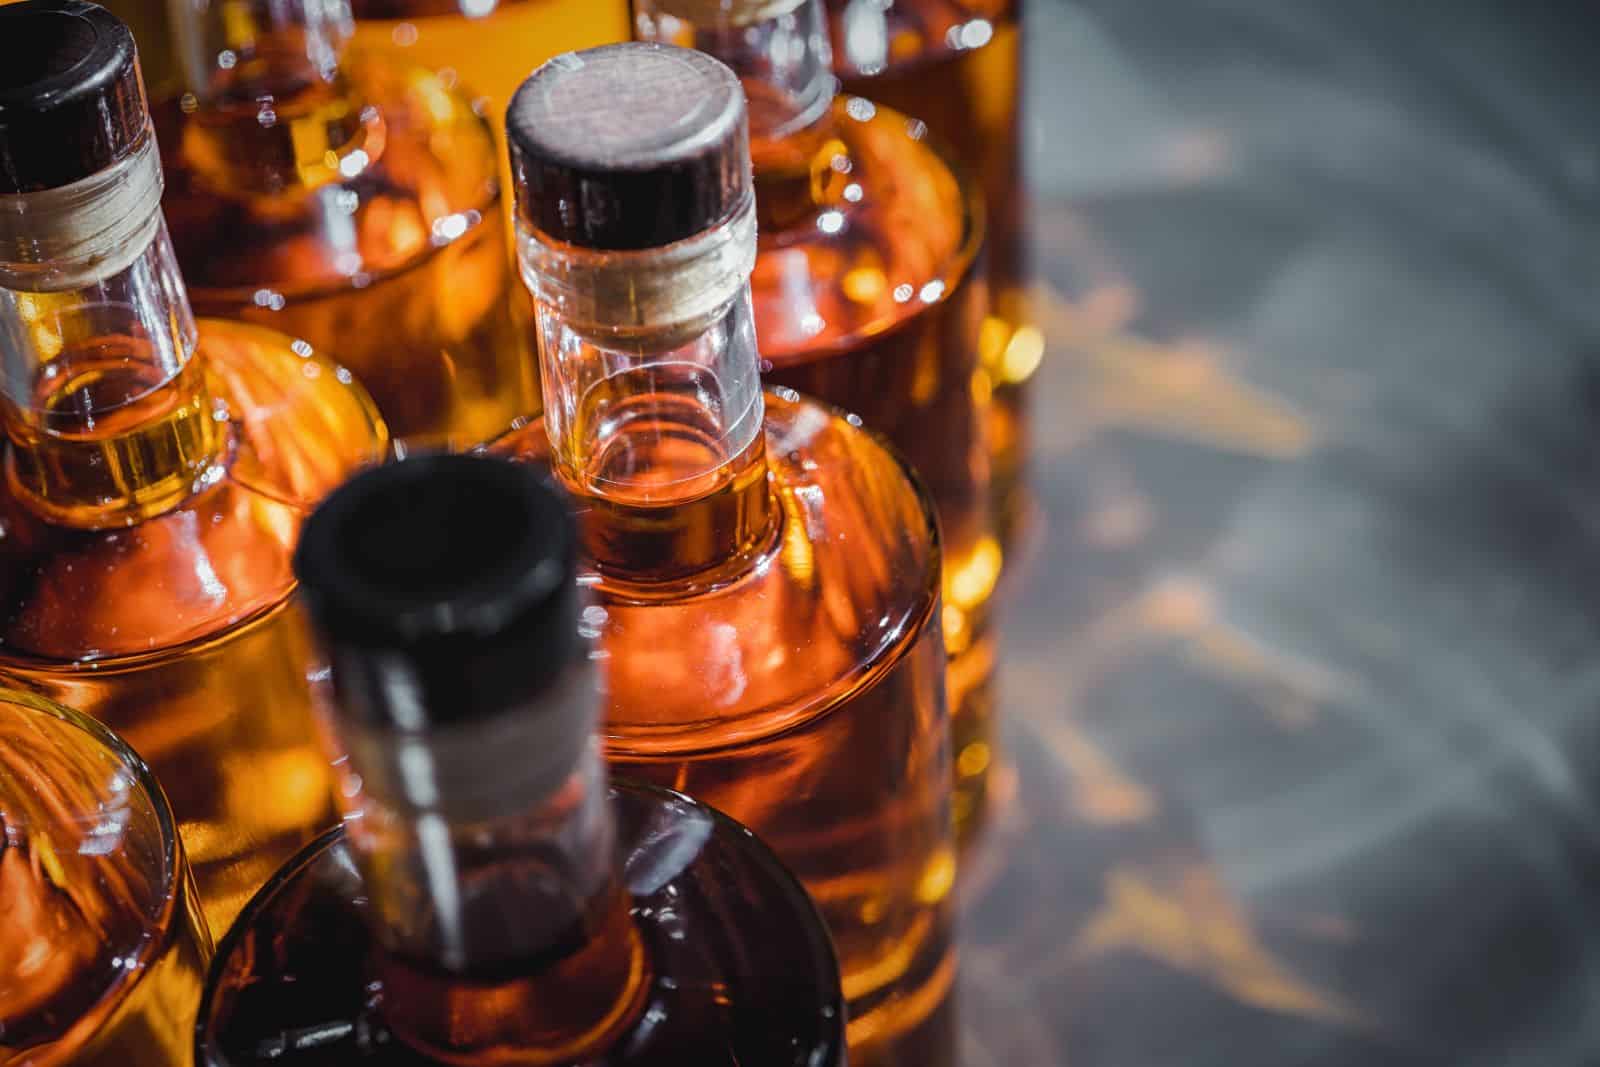 Image Credit: Shutterstock / Vicky Gosselin <p><span>“With distilleries now in 42 counties, bourbon tourism is resurrecting Main Streets across the commonwealth and pouring much-needed revenue into local coffers,” said the Kentucky Distillers’ Association president Eric Gregory. “And there’s more to come.” </span></p>